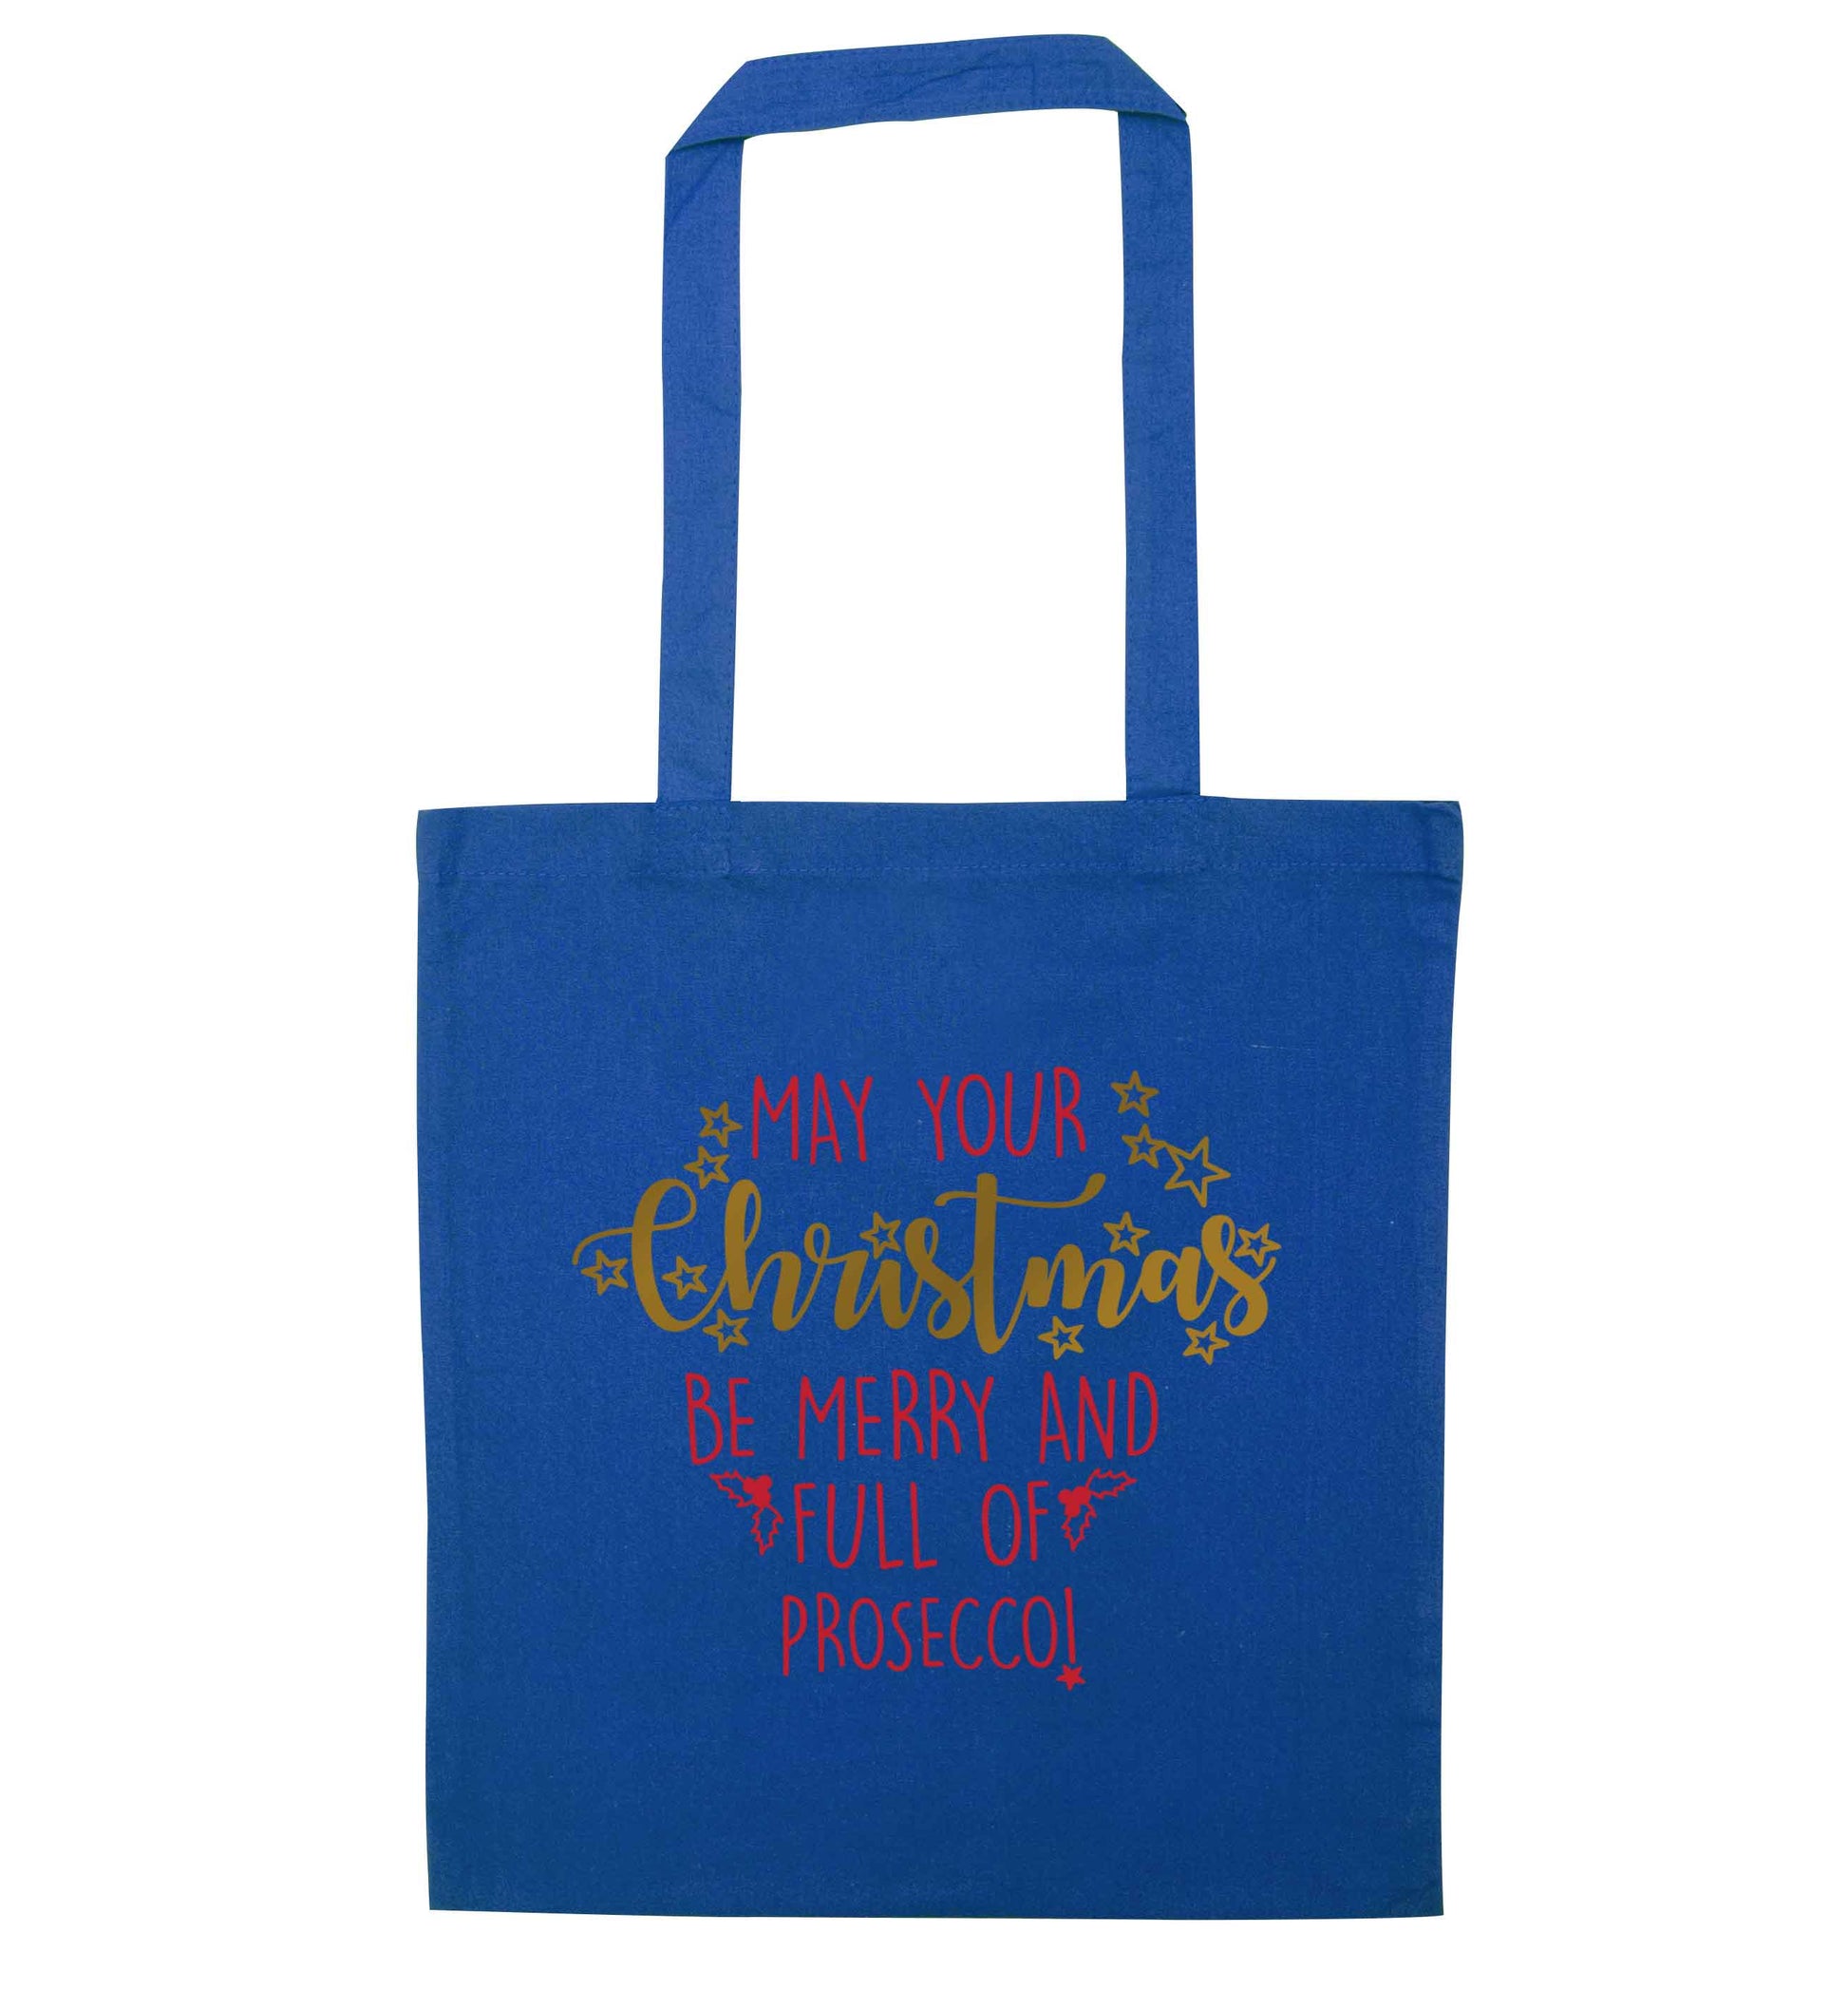 May your Christmas be merry and full of prosecco blue tote bag